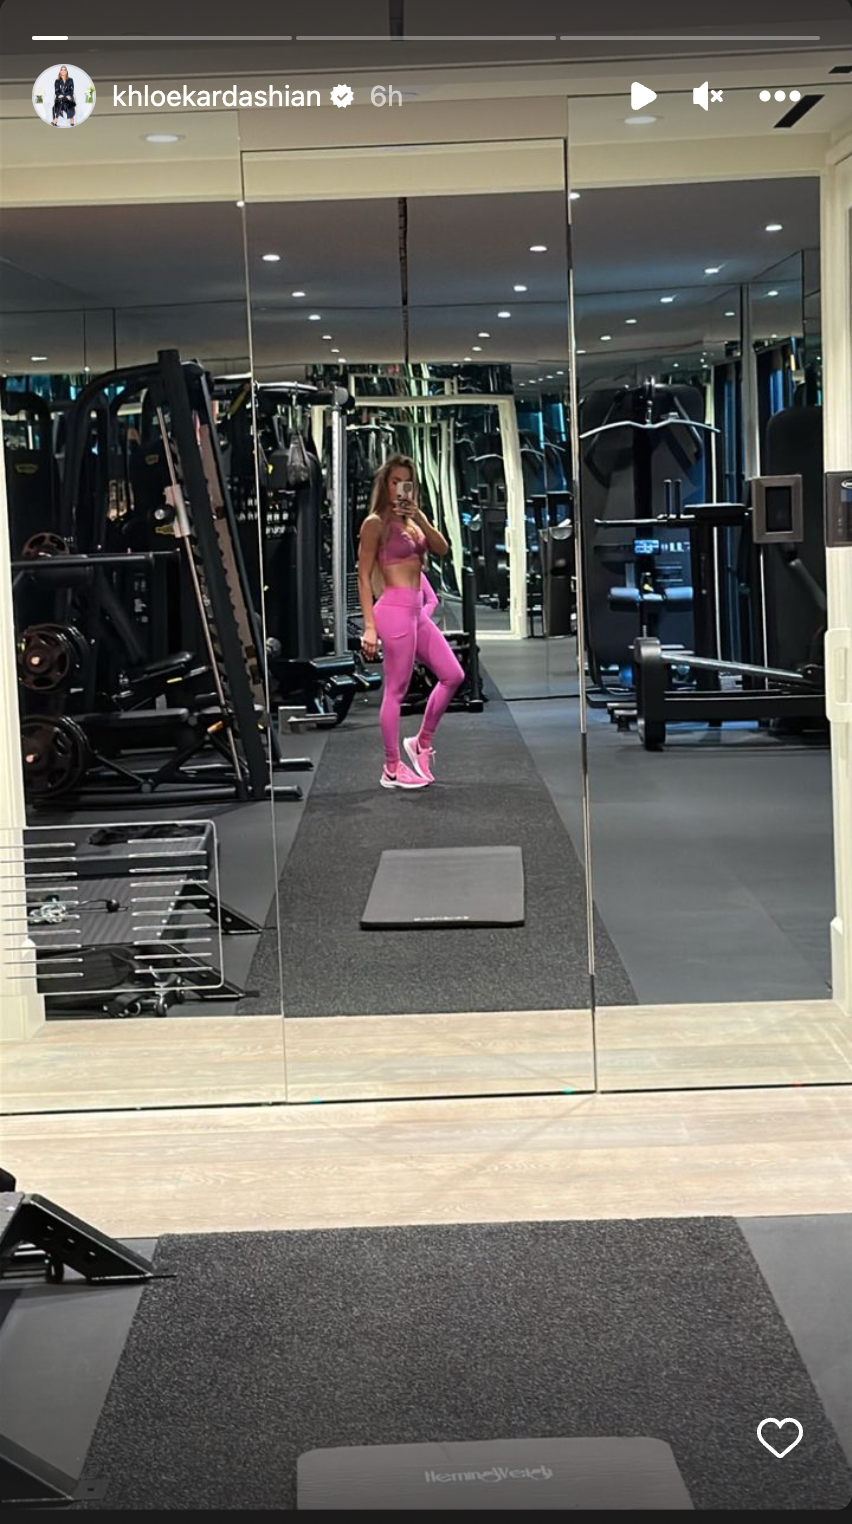 Khloe Kardashian flaunts her butt and abs in the gym